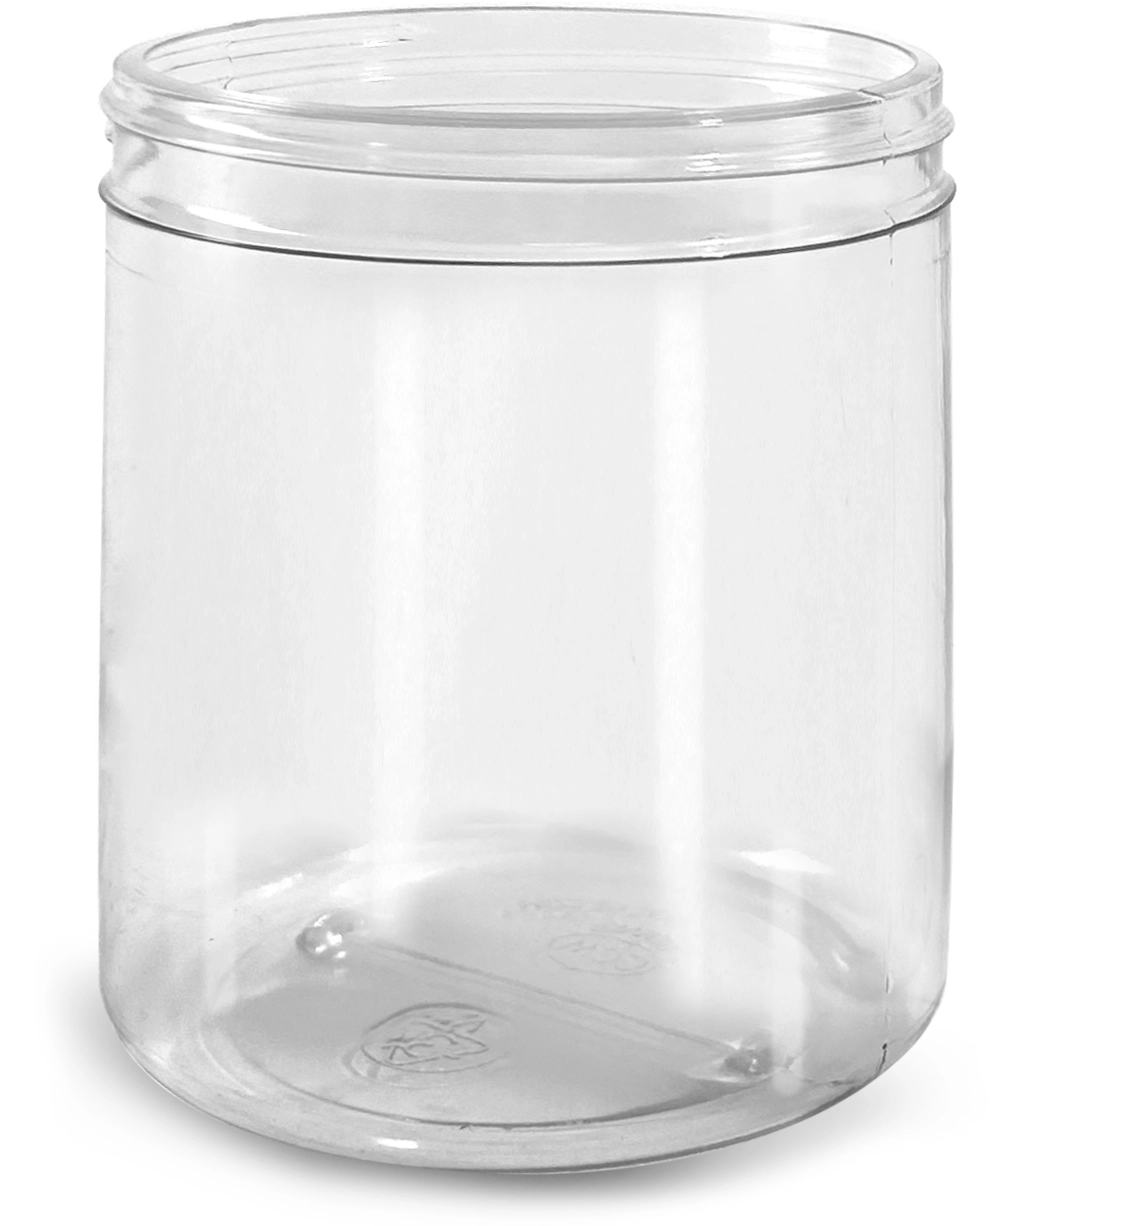 41 oz Round Flair Clear PET Jars (Bulk), Caps Not Included